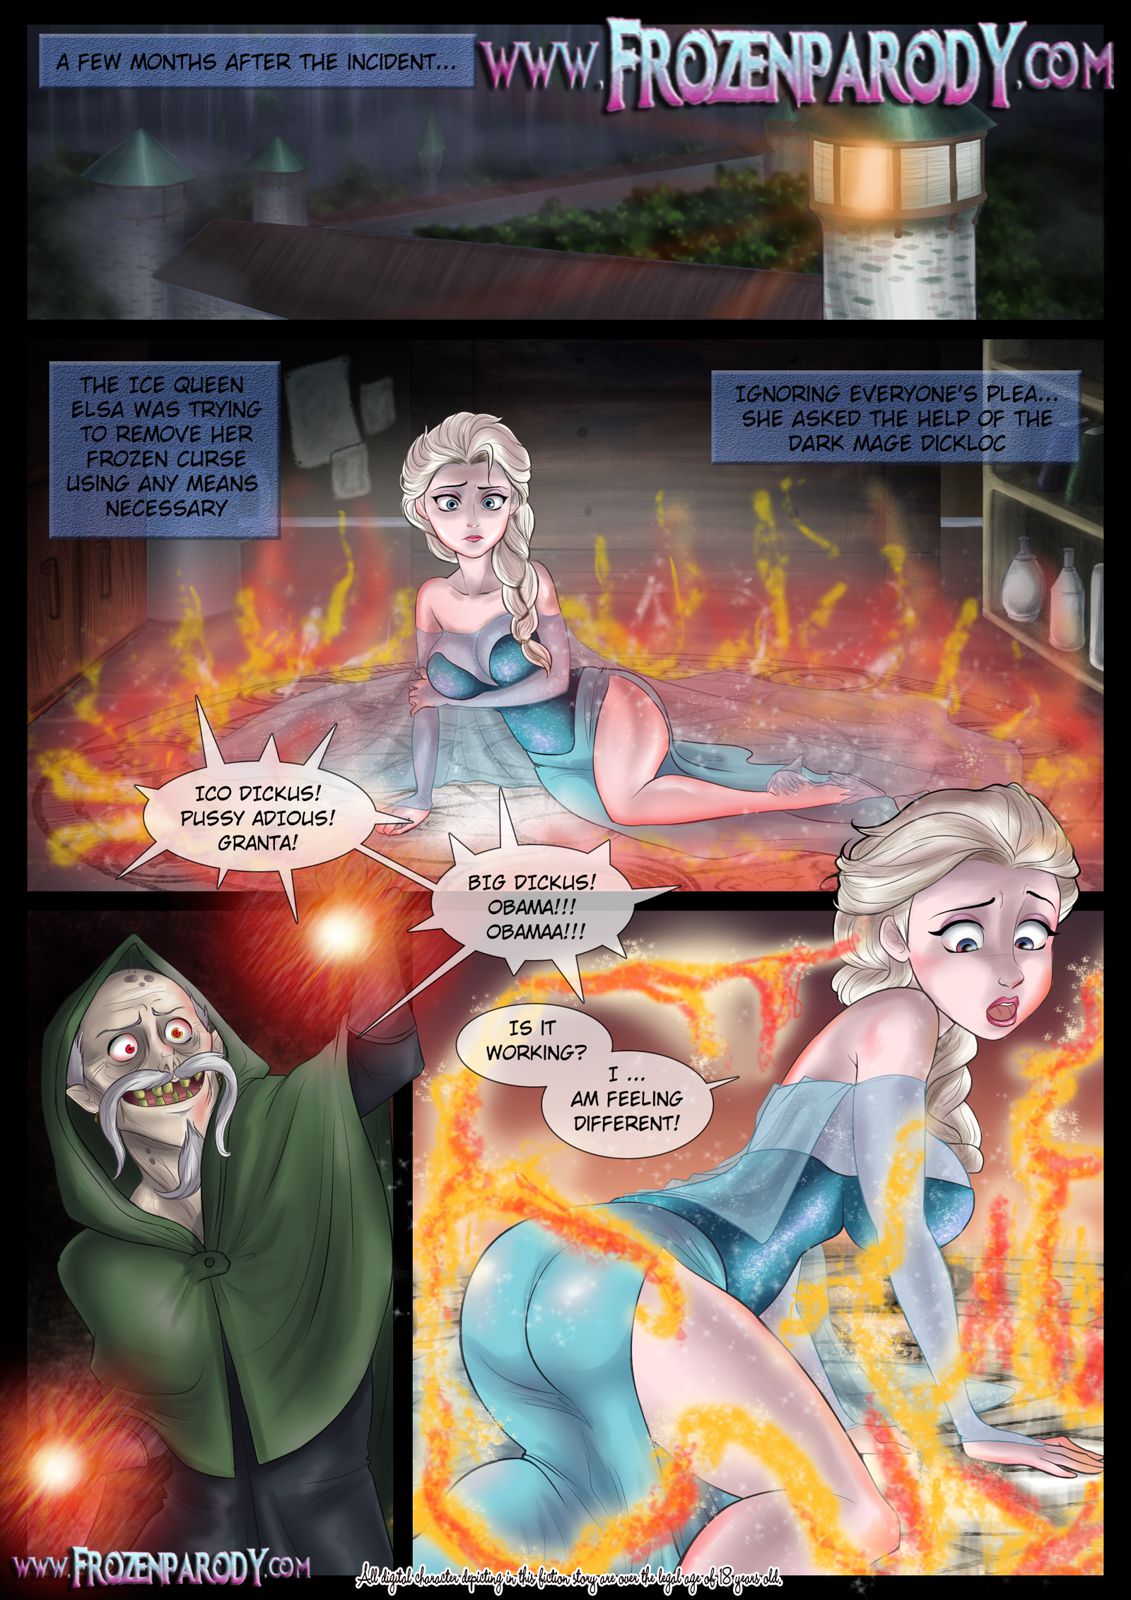 Removing The Curse (Frozen) [FrozenParody] - 1 . Removing The Curse -  Chapter 1 (Frozen) [FrozenParody] - AllPornComic